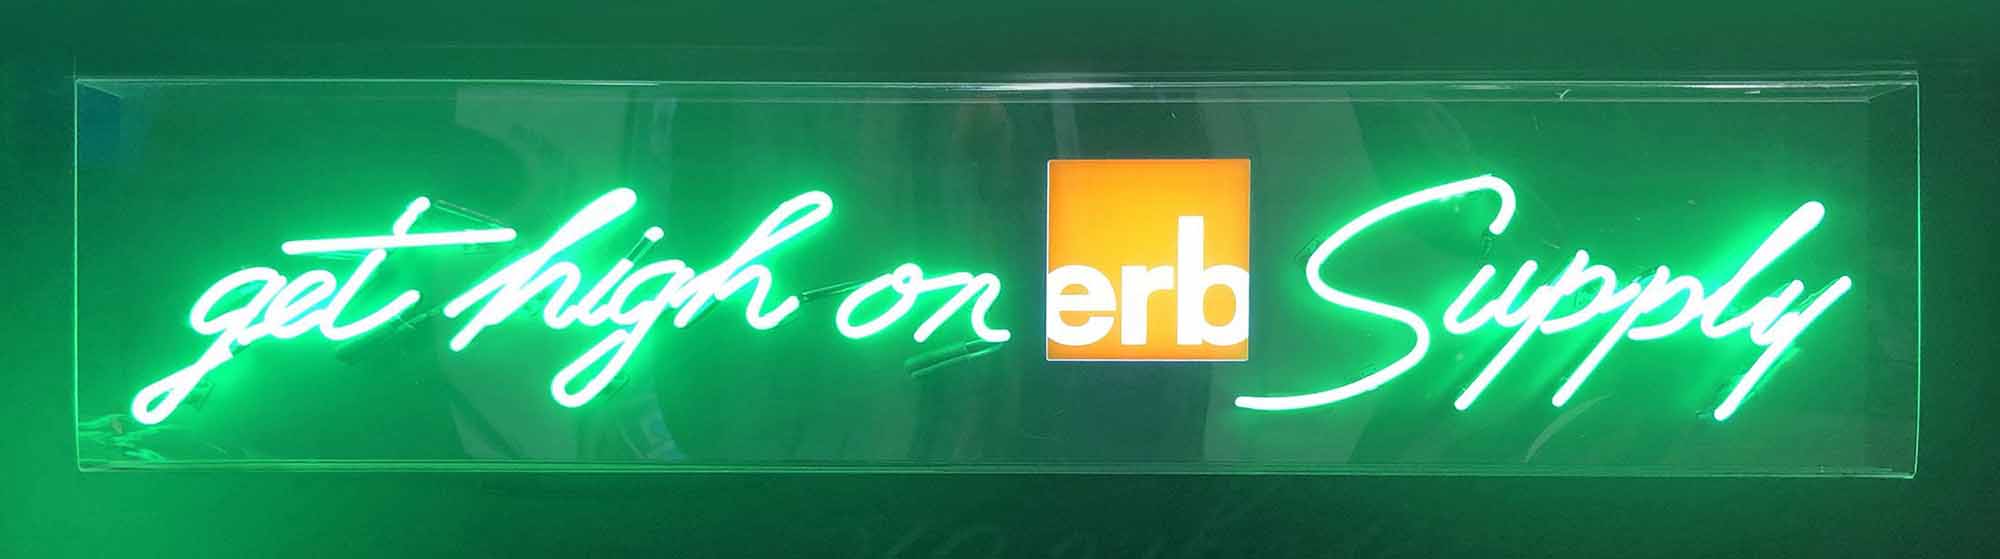 ERB SUPPLY GET HIGH SIGN IN NEON